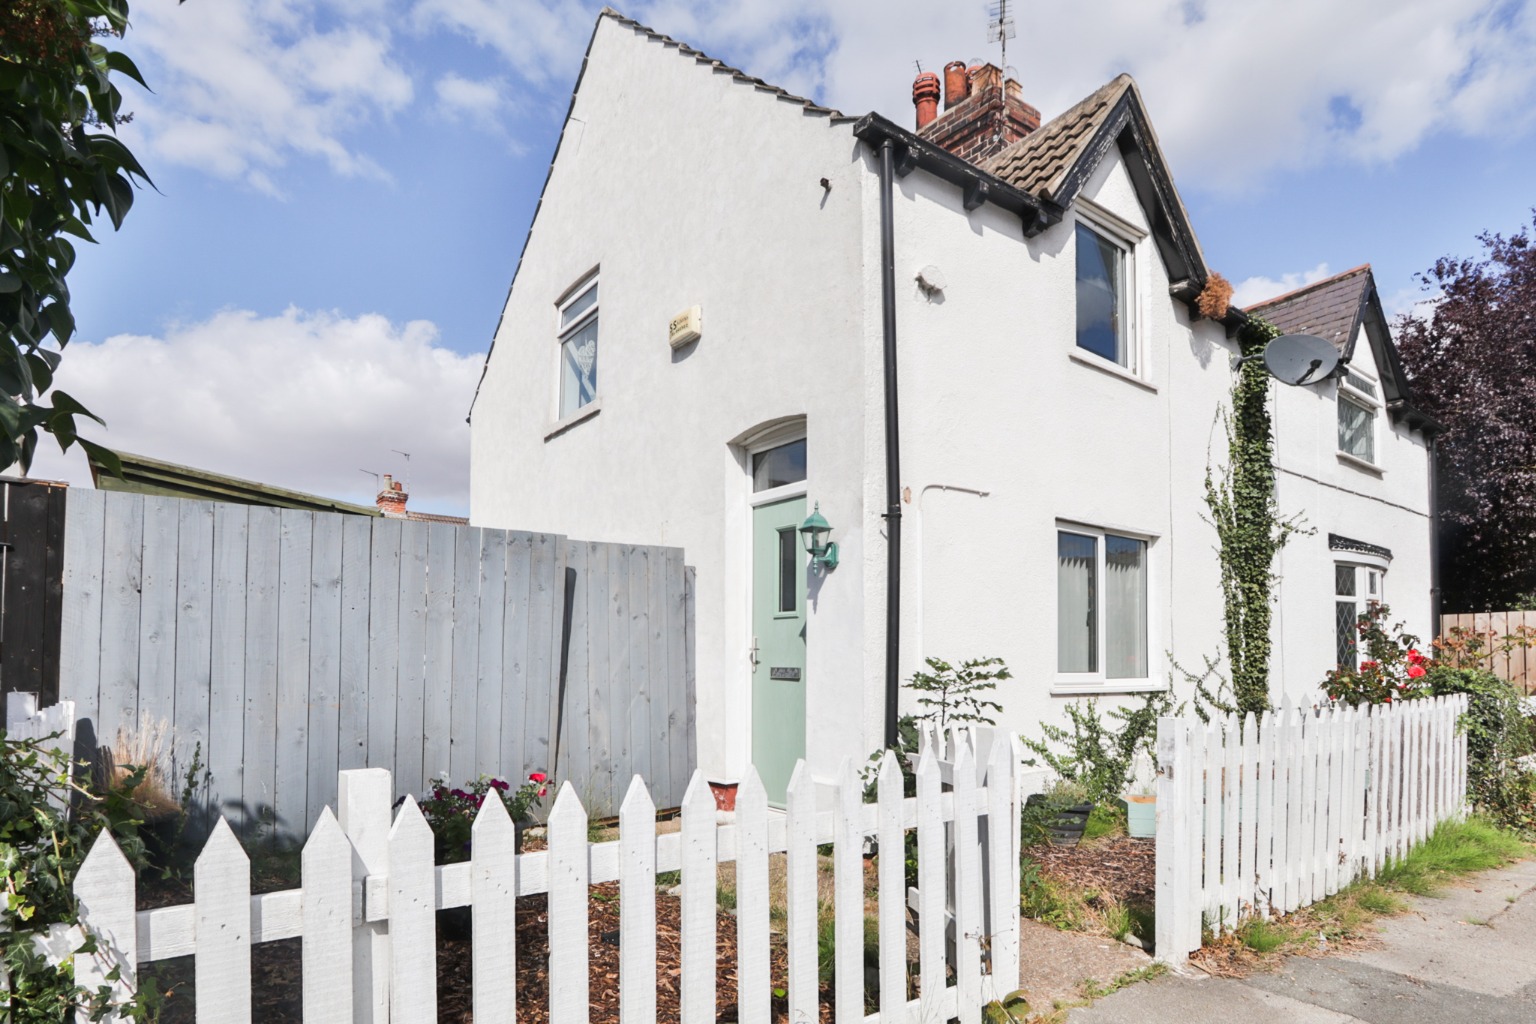 2 bed semi-detached house for sale - Property Image 1